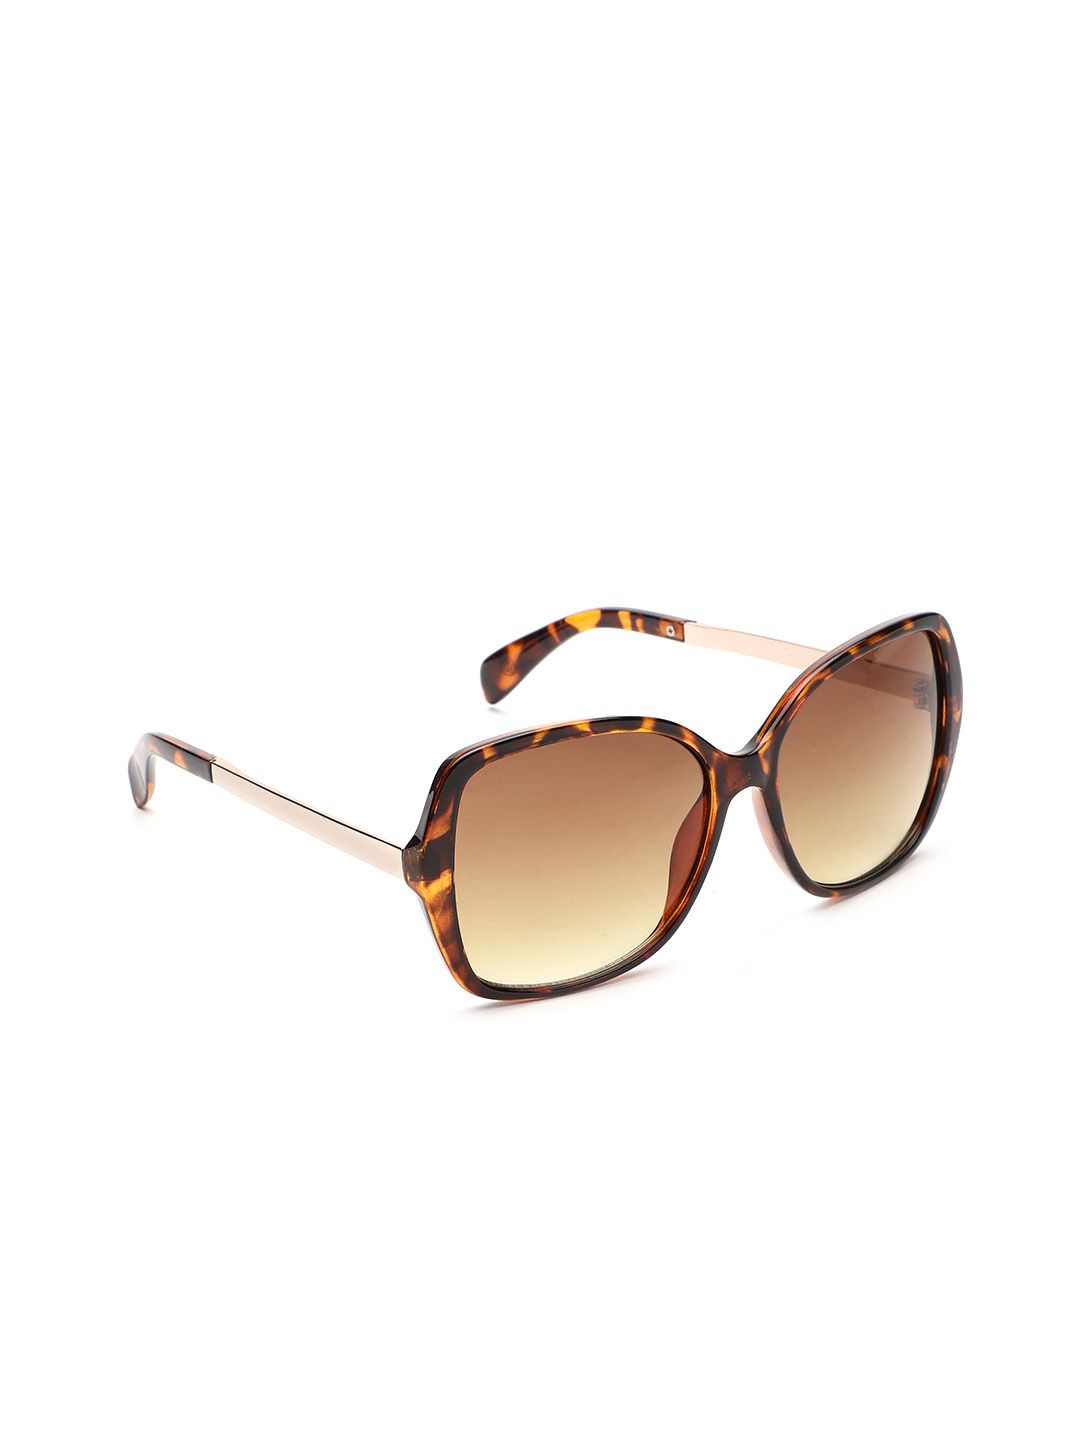 Carlton London Women Yellow Lens & Brown Oversized Sunglasses UV Protected Lens CLSW007 Price in India